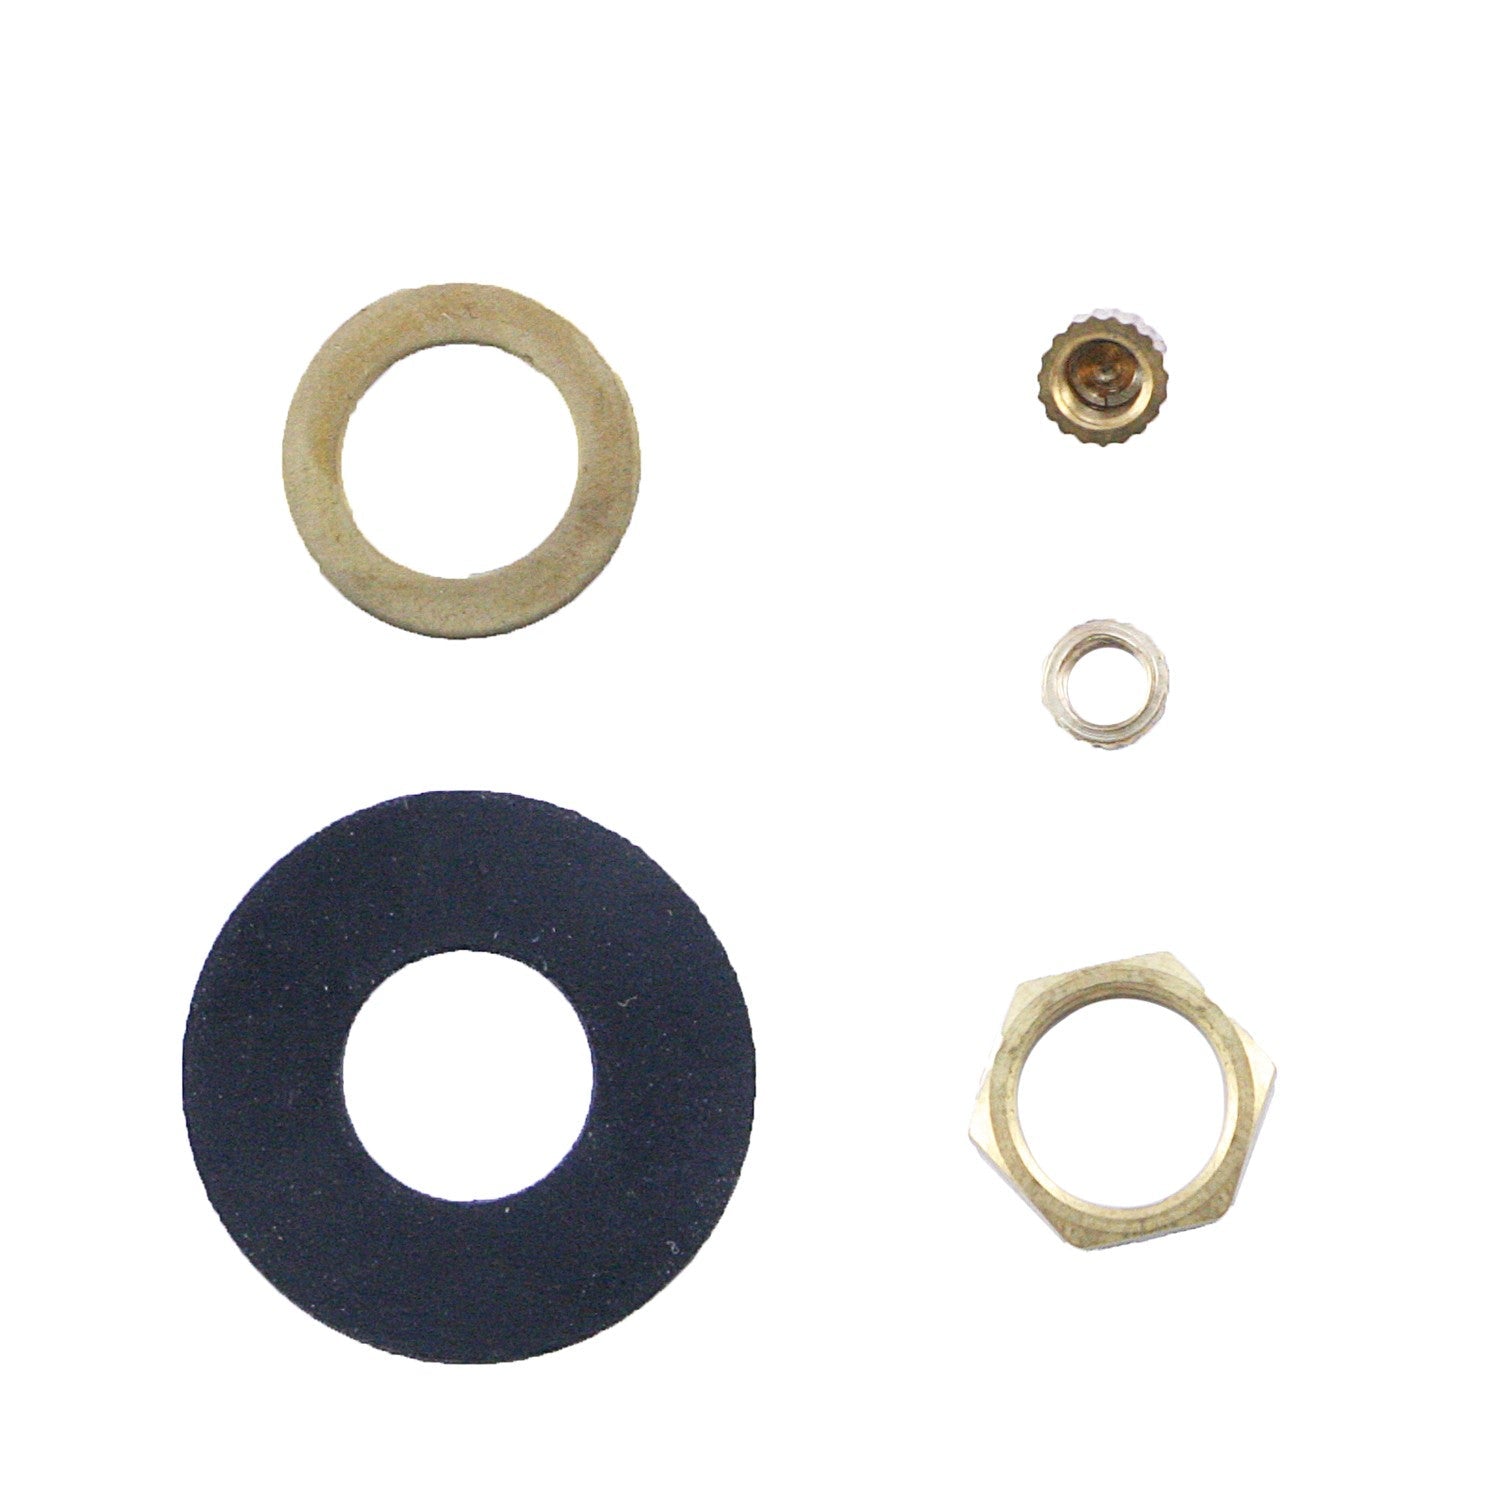 American Made standard “C Battery” size movement